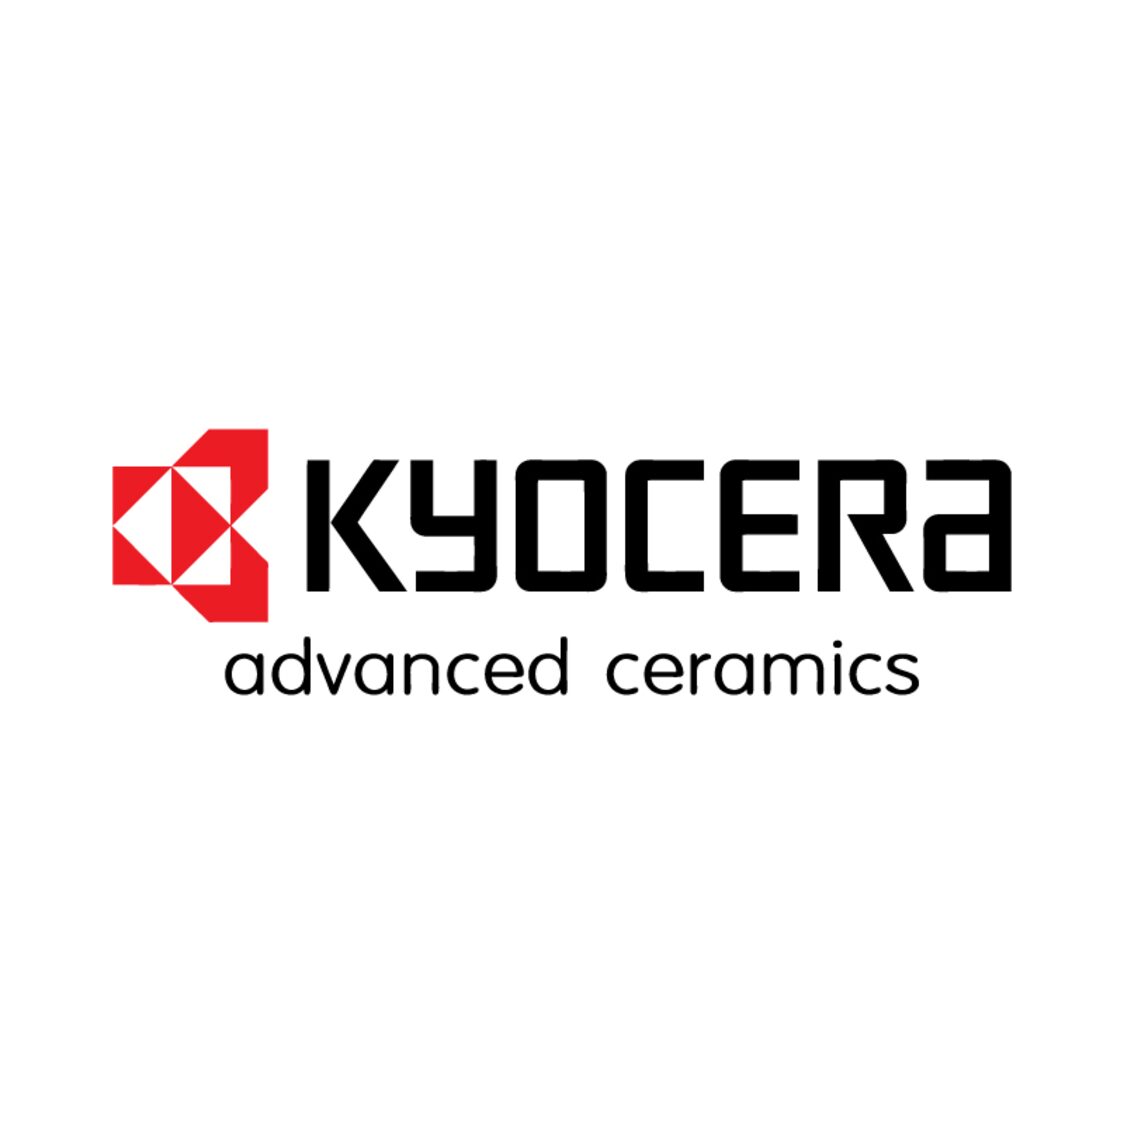 Kyocera Printers - All Printers and models available from Printer Experts